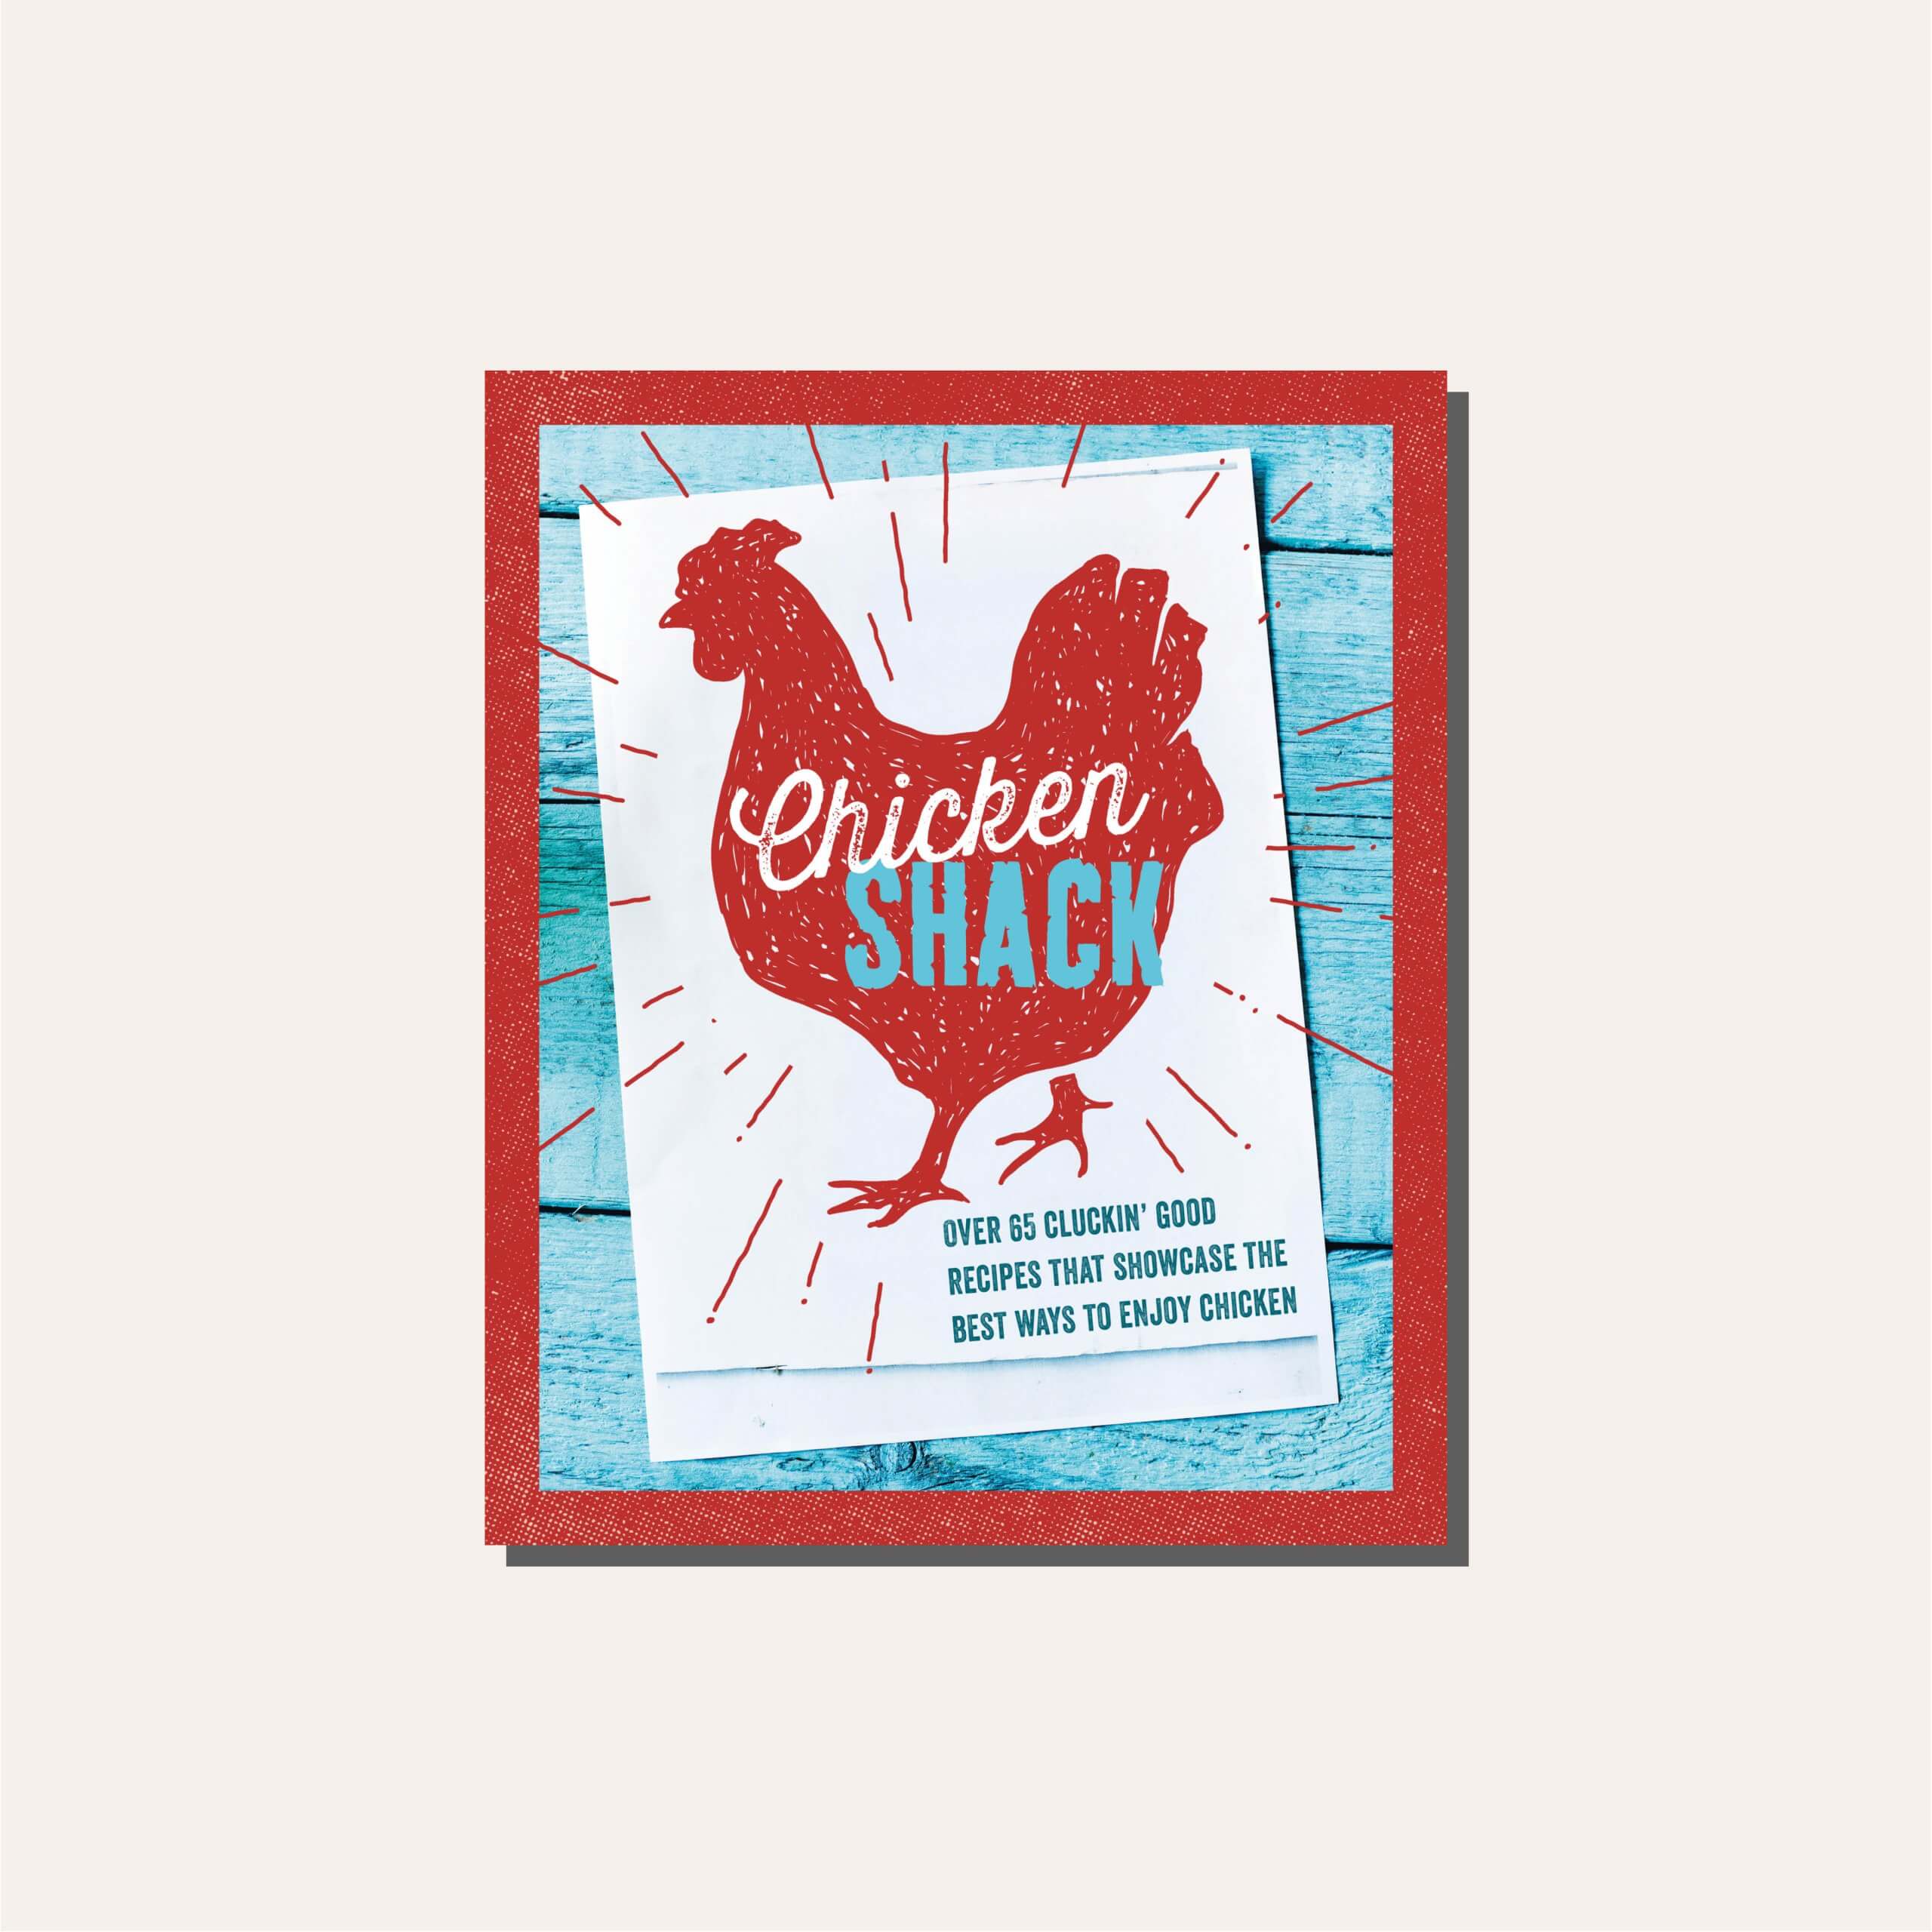 A red and blue cookbook cover in a light tan frame